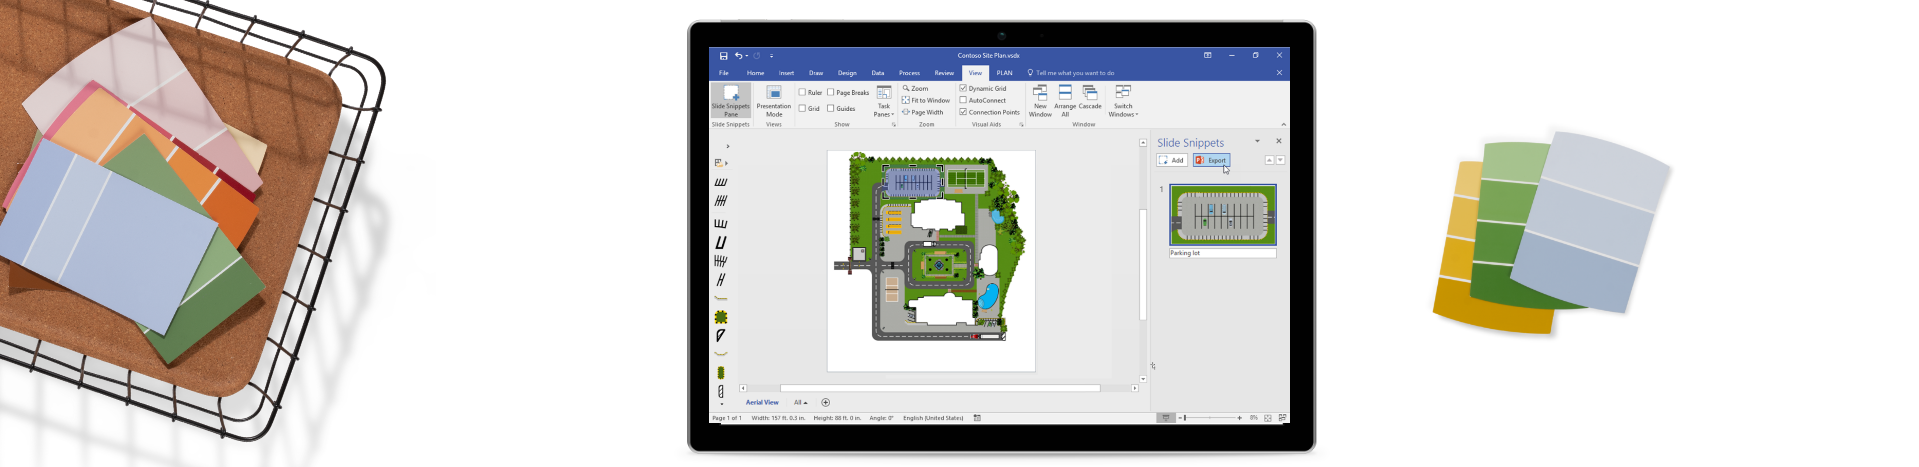 Multiple paint swatches in a basket and a tablet device showing a floorplan in Powerpoint.